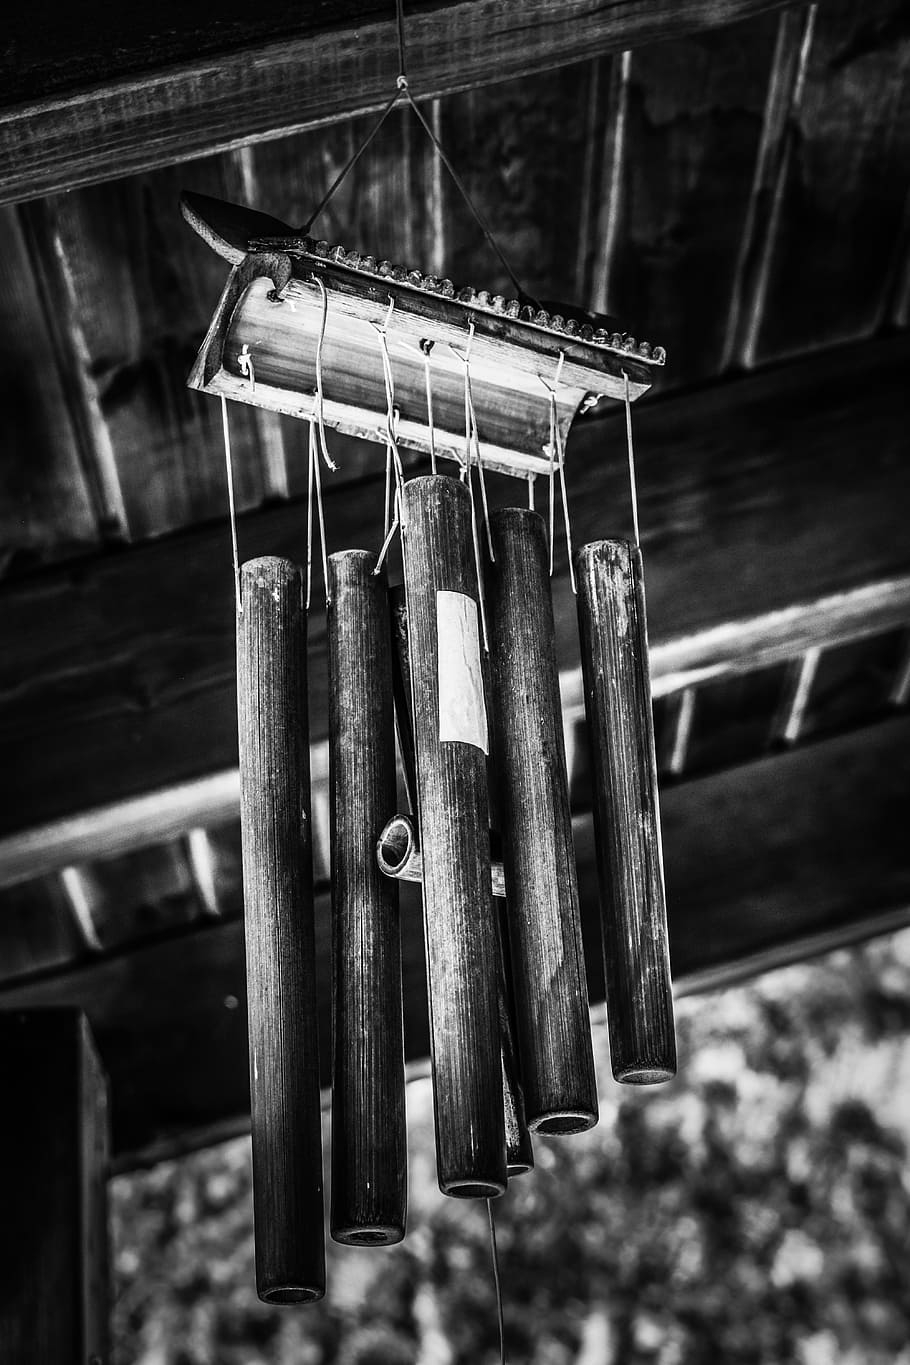 windspiel, bamboo, feng shui, black and white, hanging, focus on foreground, wood - material, close-up, metal, day